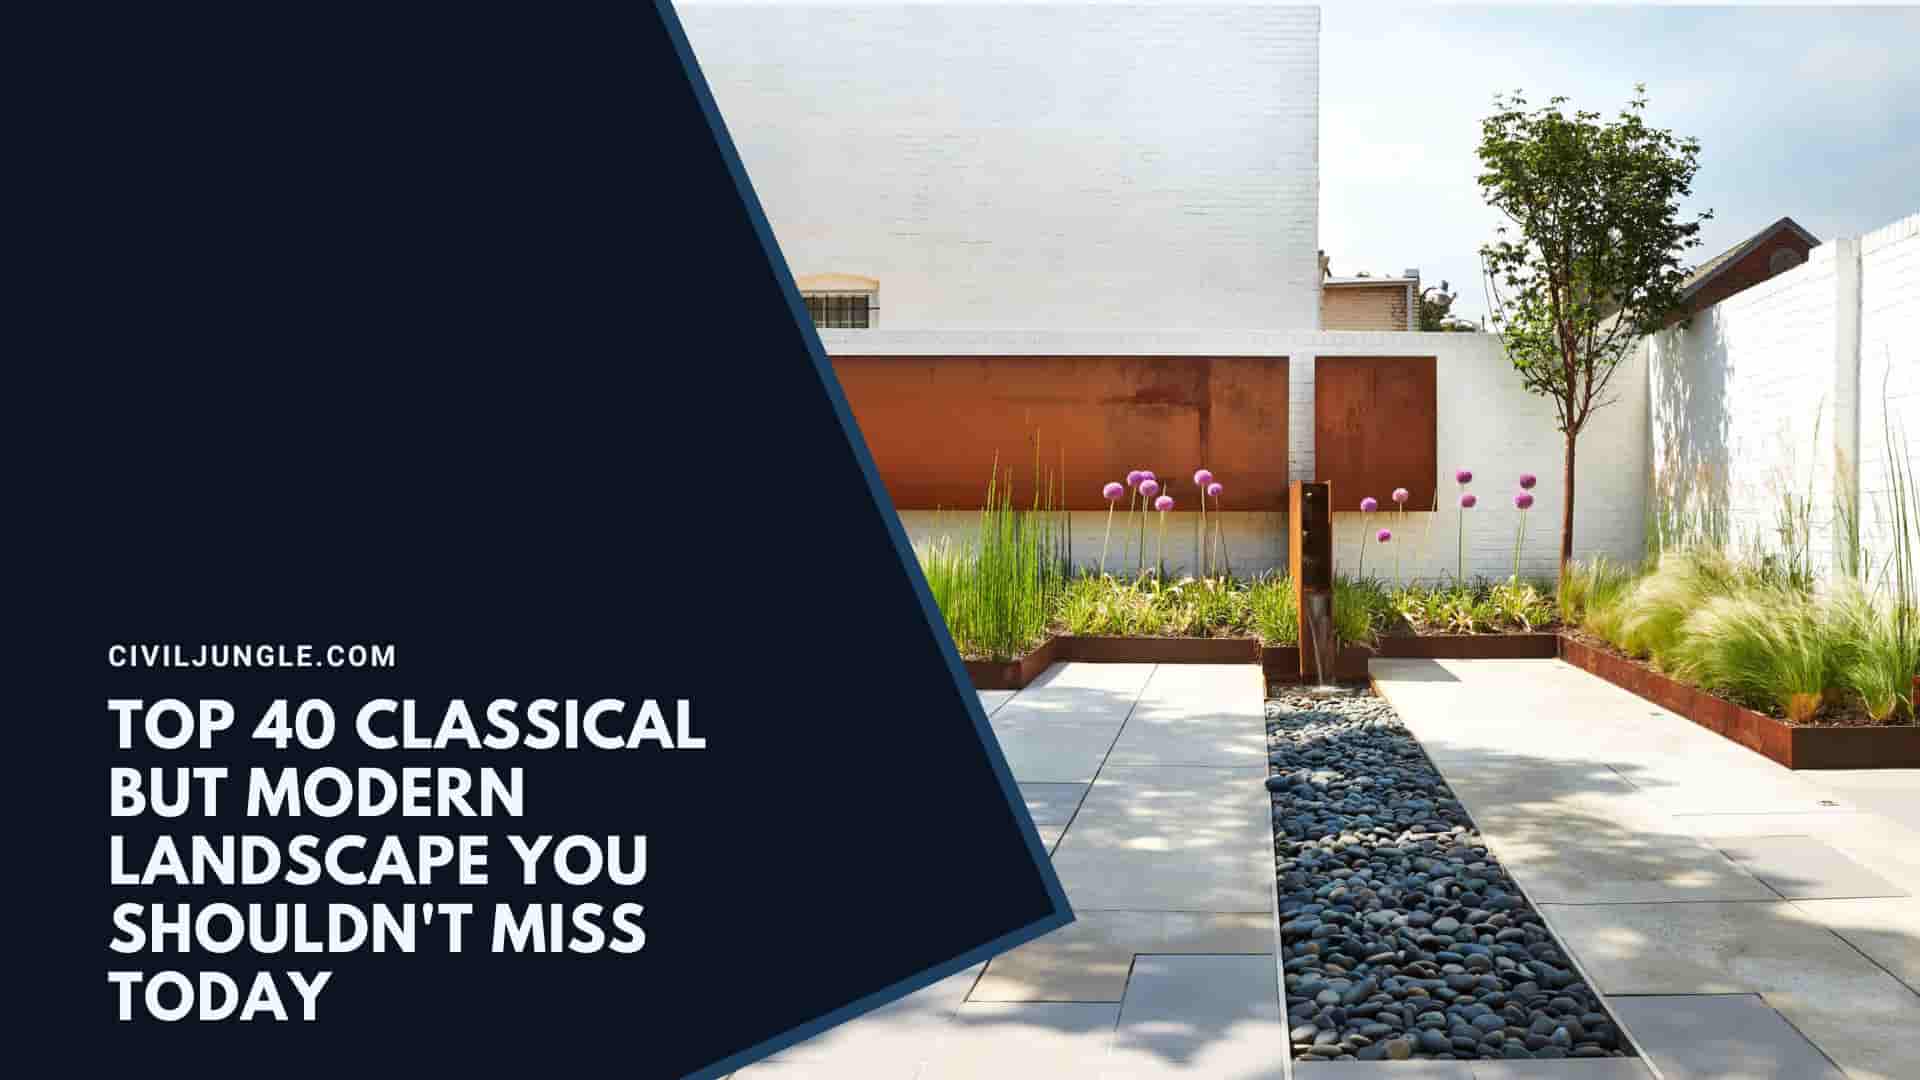 Top 40 Classically but Modern Landscape You Shouldn’t Miss Today